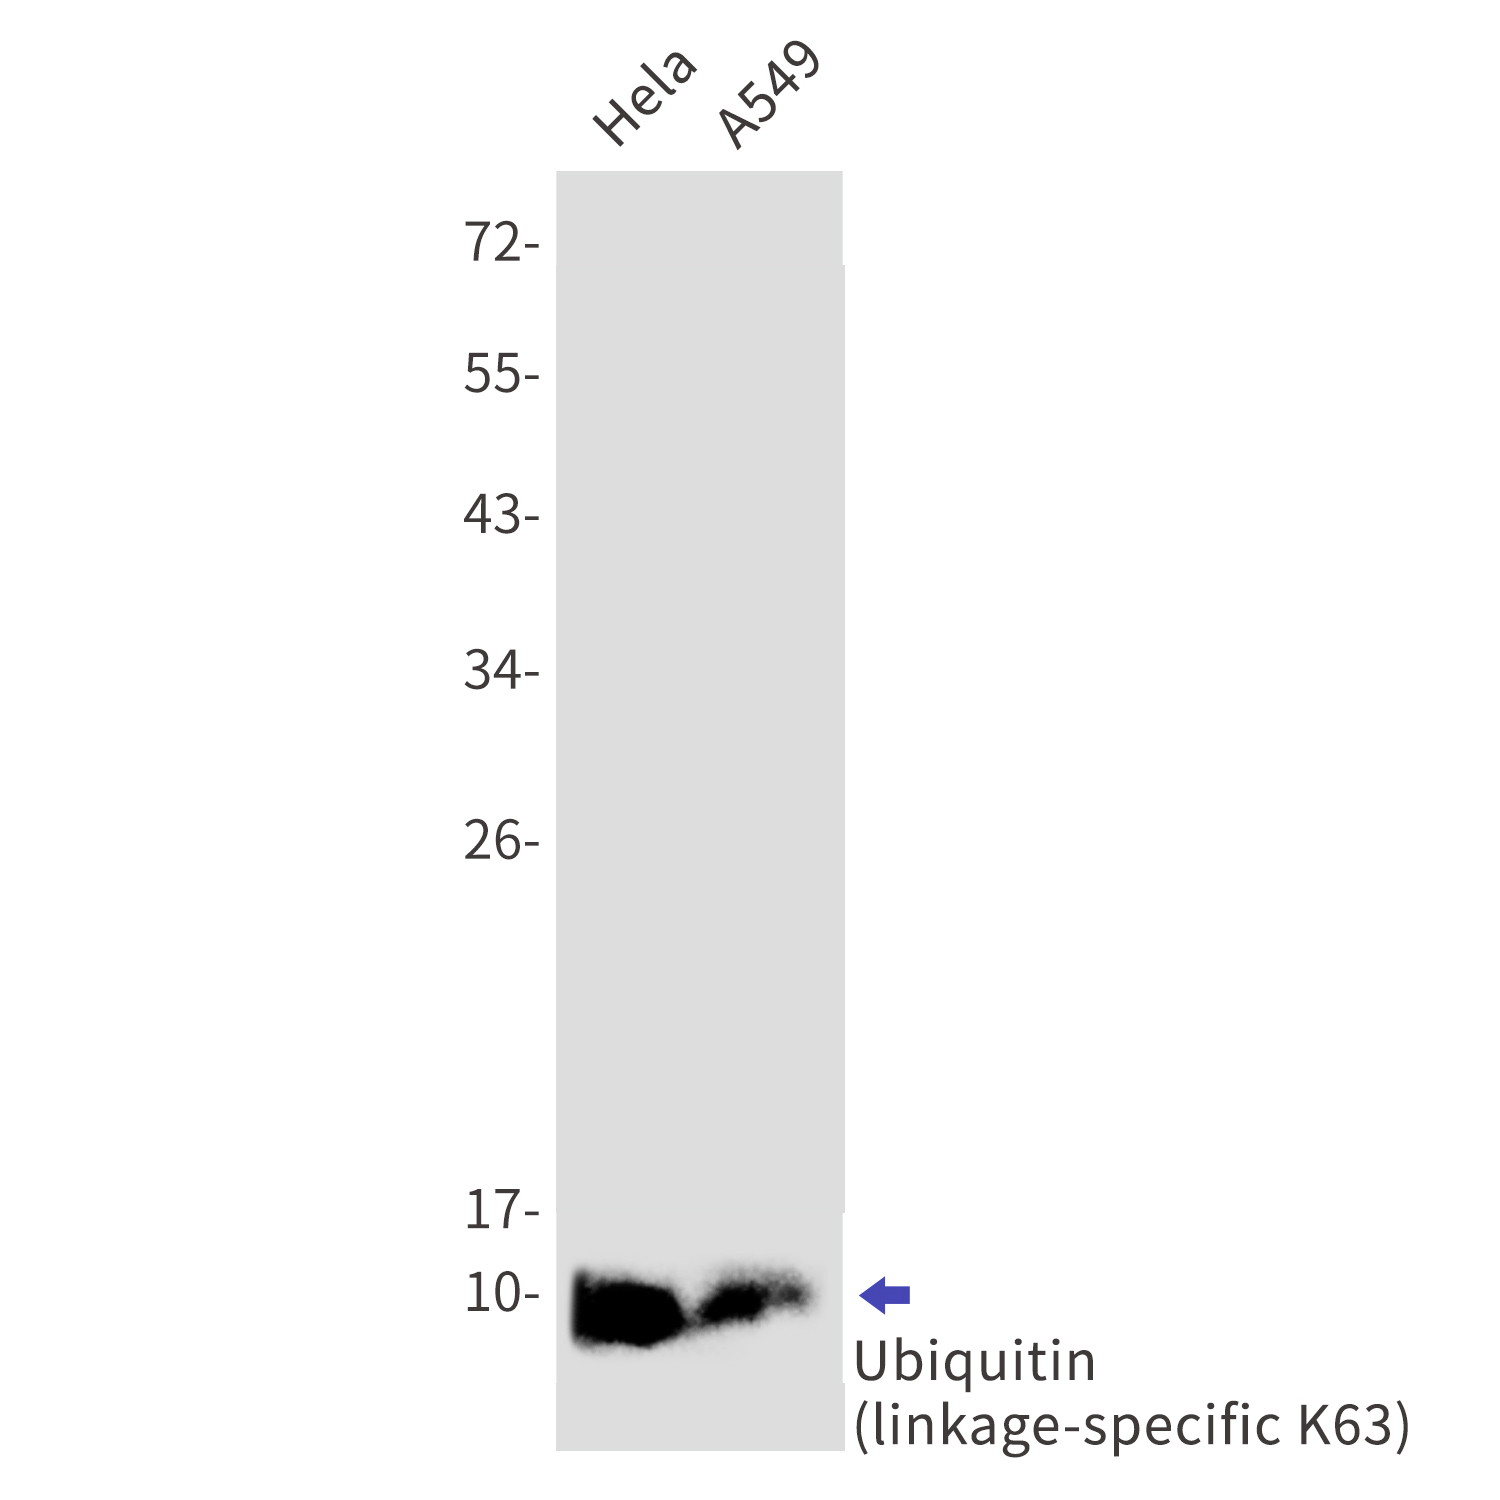 Western blot detection of Ubiquitin (linkage-specific K63) in Hela,A549 cell lysates using Ubiquitin (linkage-specific K63) Rabbit mAb(1:1000 diluted).Predicted band size:8kDa.Observed band size:8kDa.